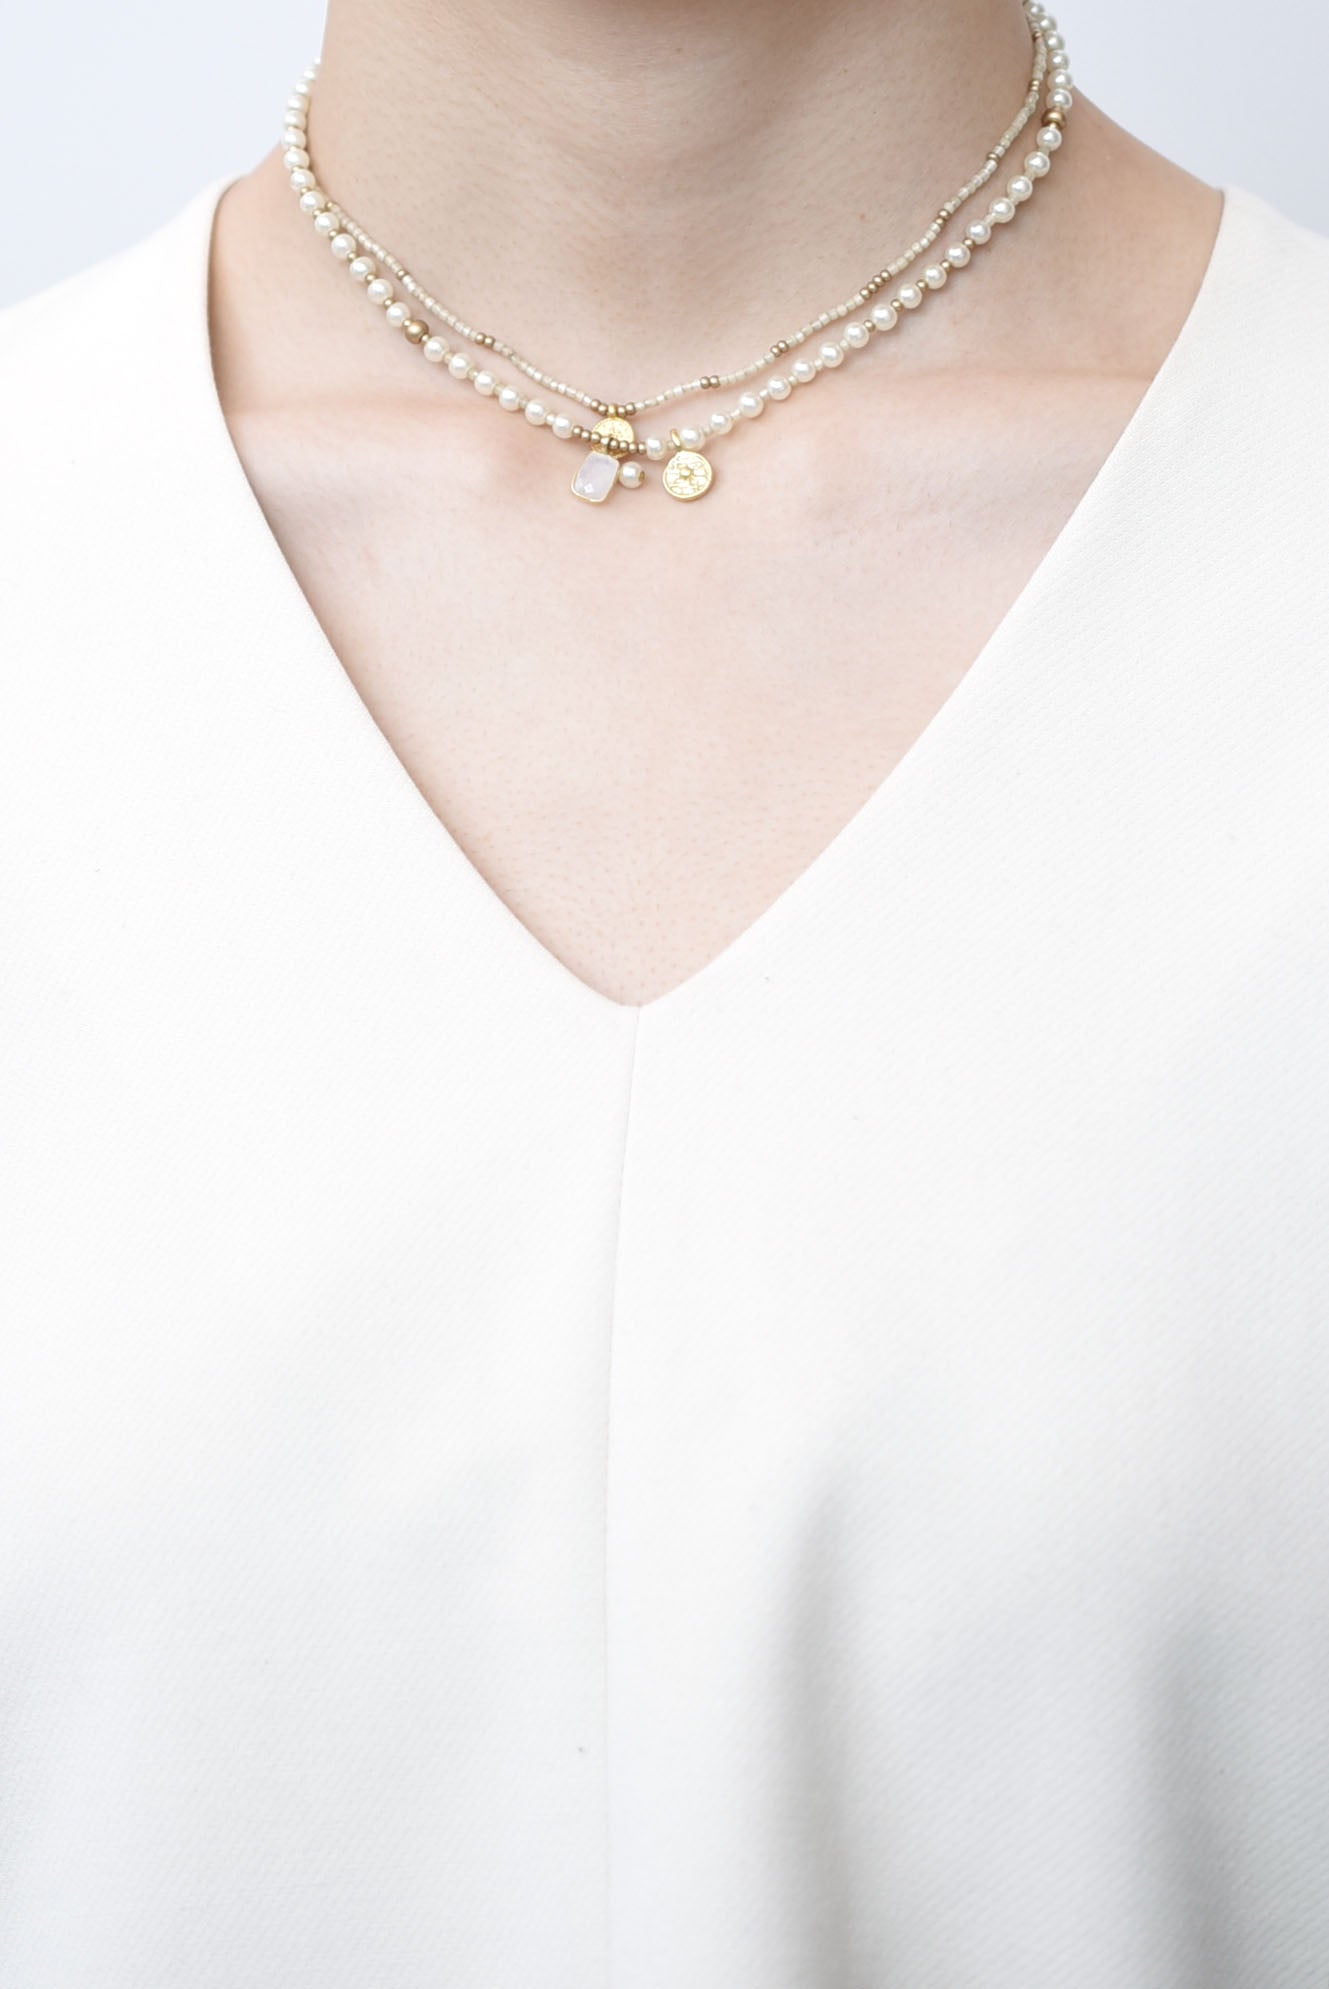 silk beads necklace – monshiro official web site